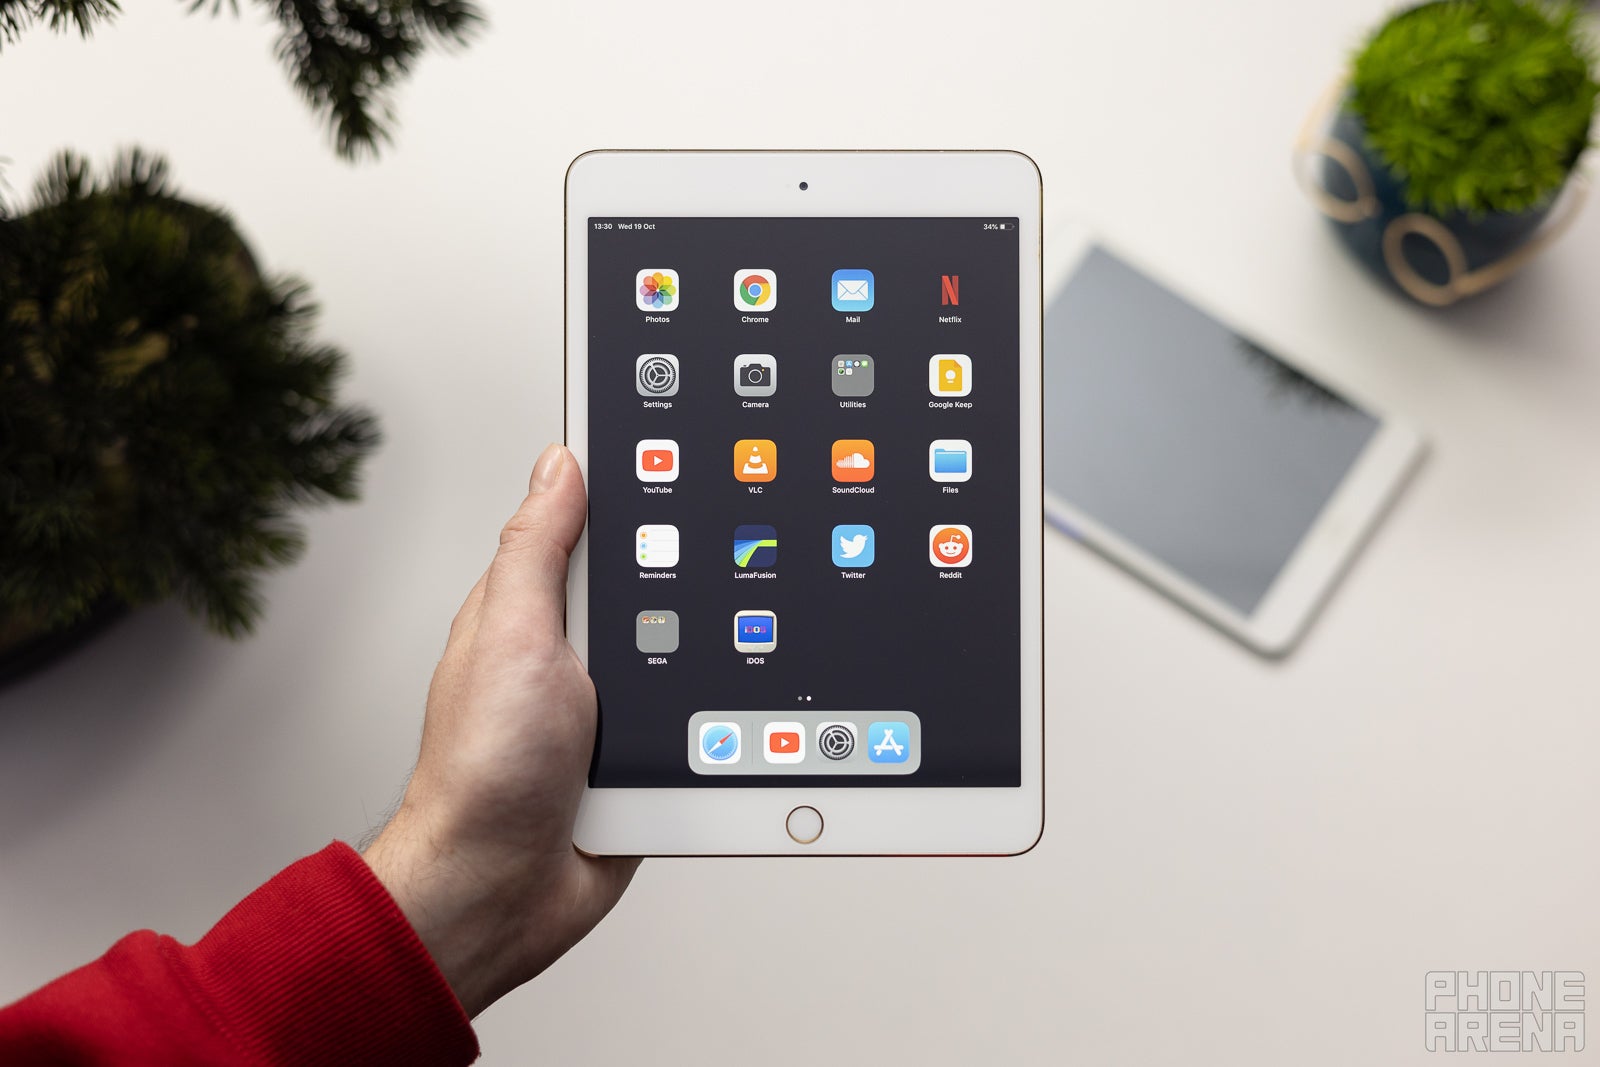 Buying this iPad is a terrible choice, but nostalgia is stronger than logic